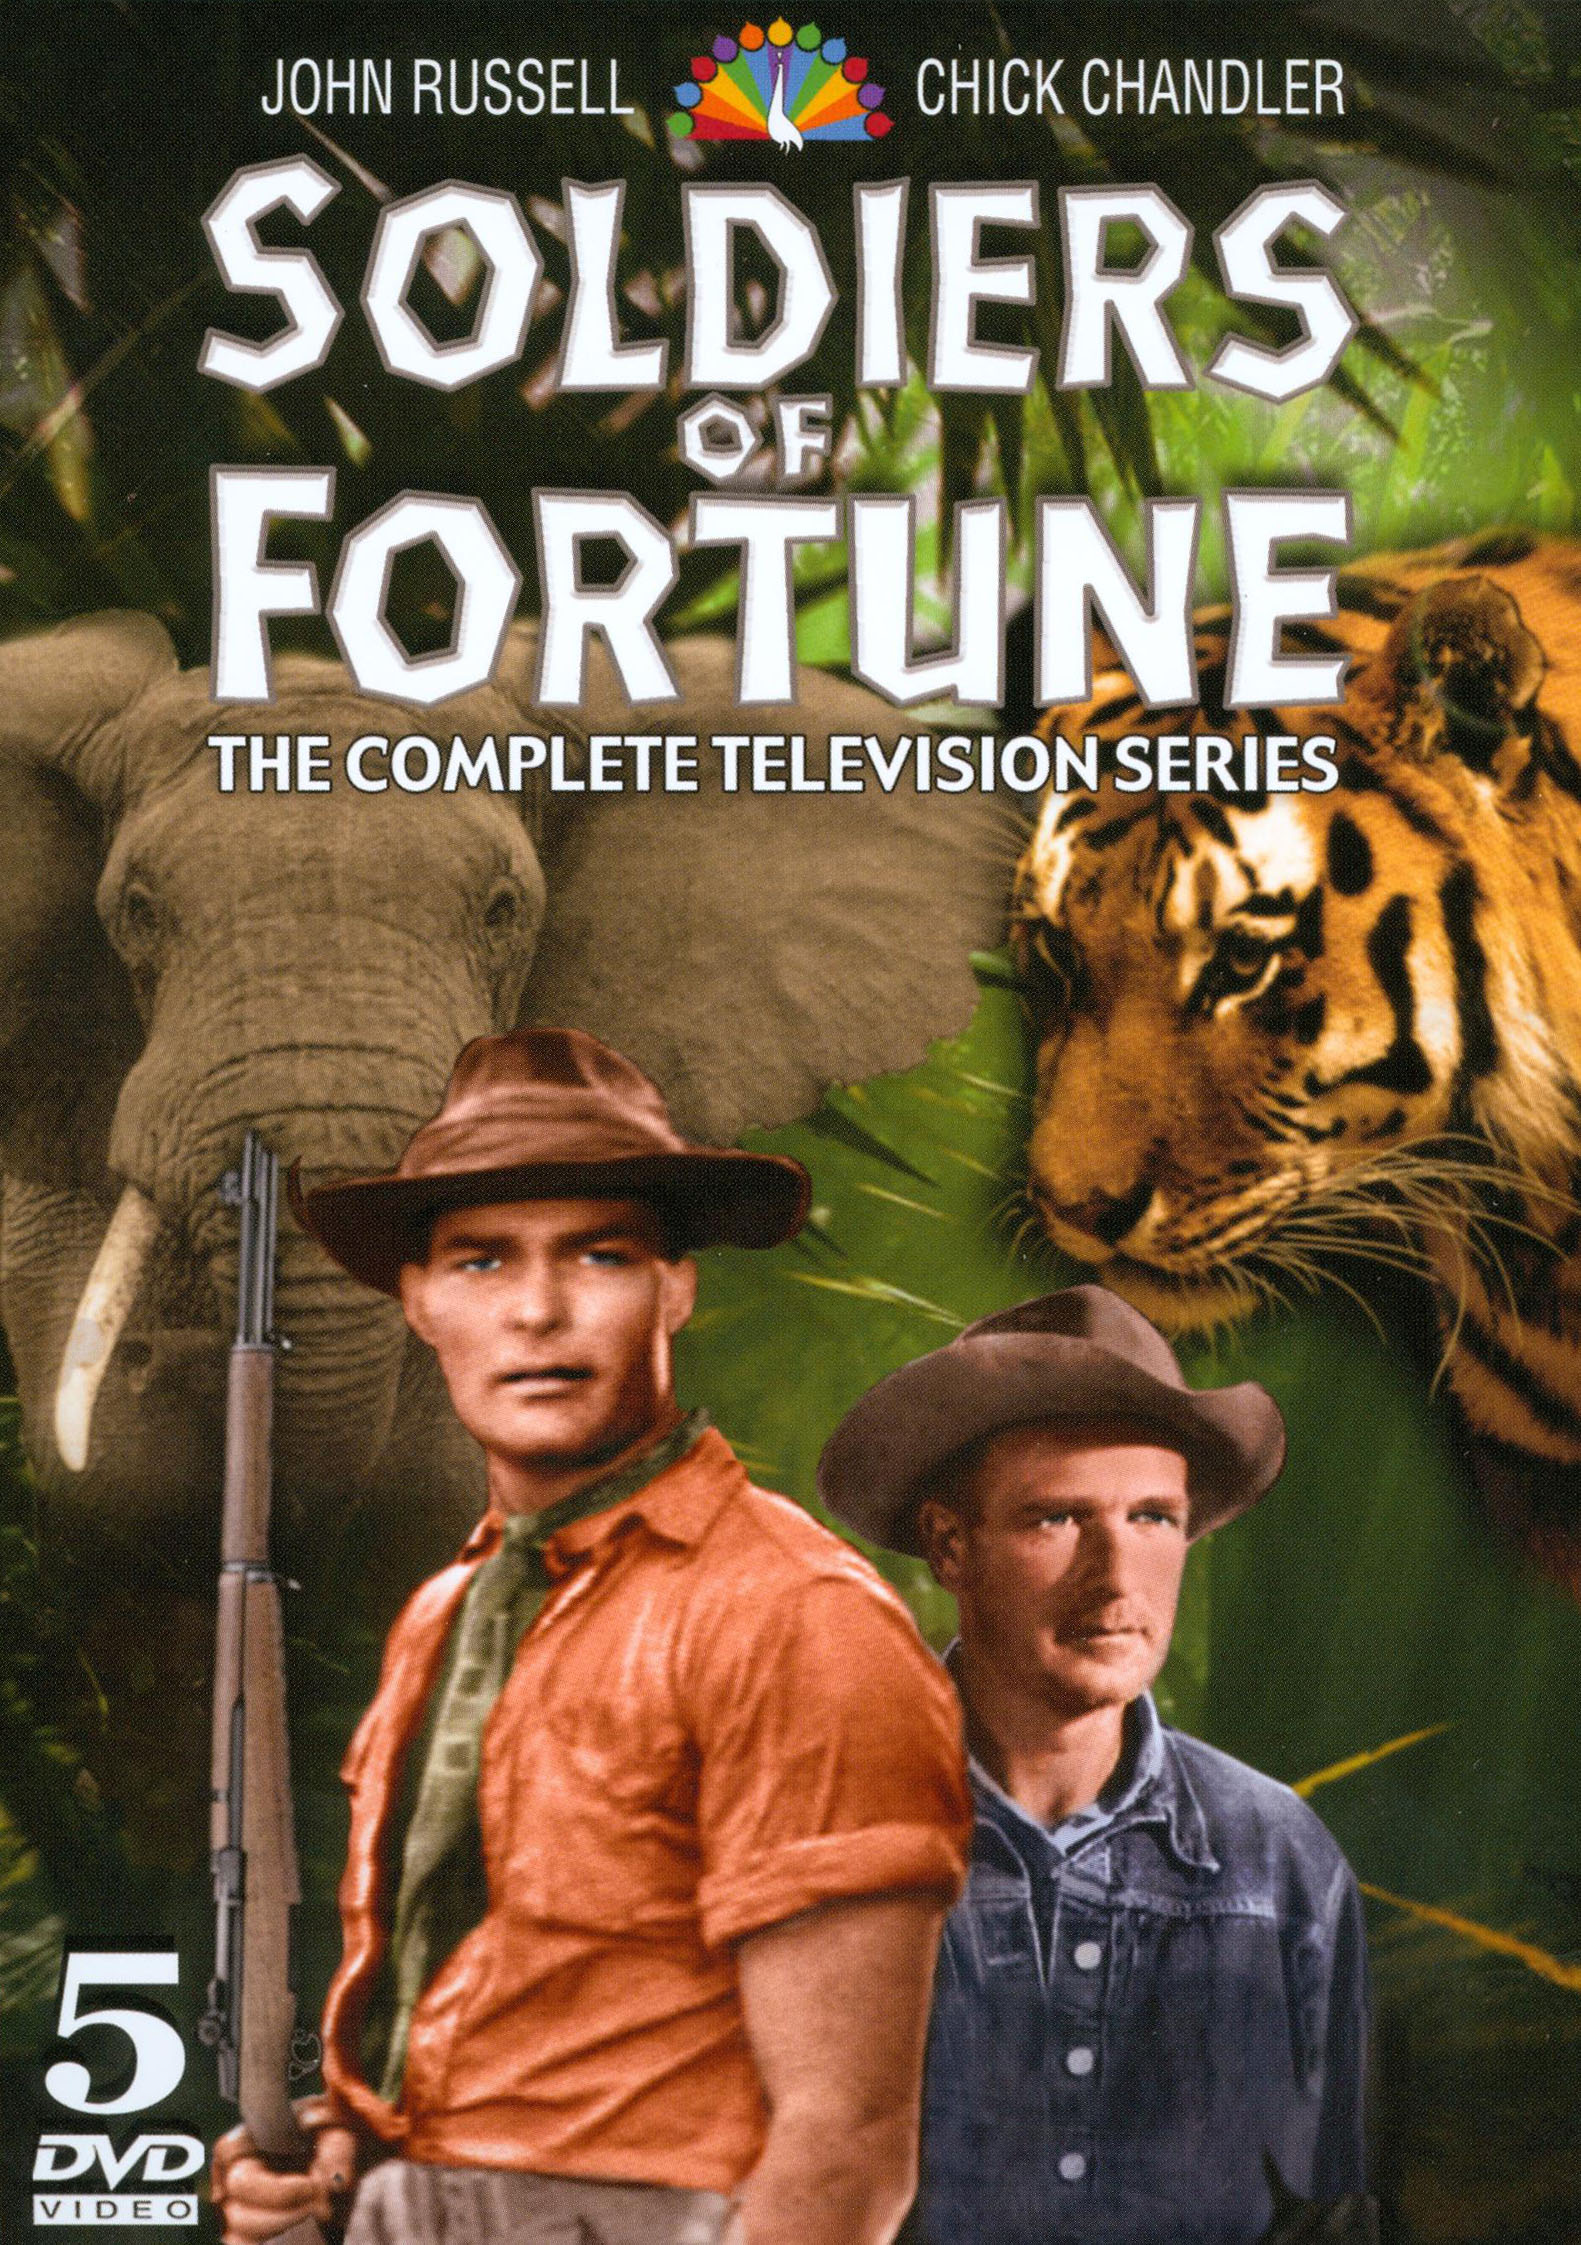 Soldiers of Fortune: The Complete Television Series [5 Discs] [DVD]